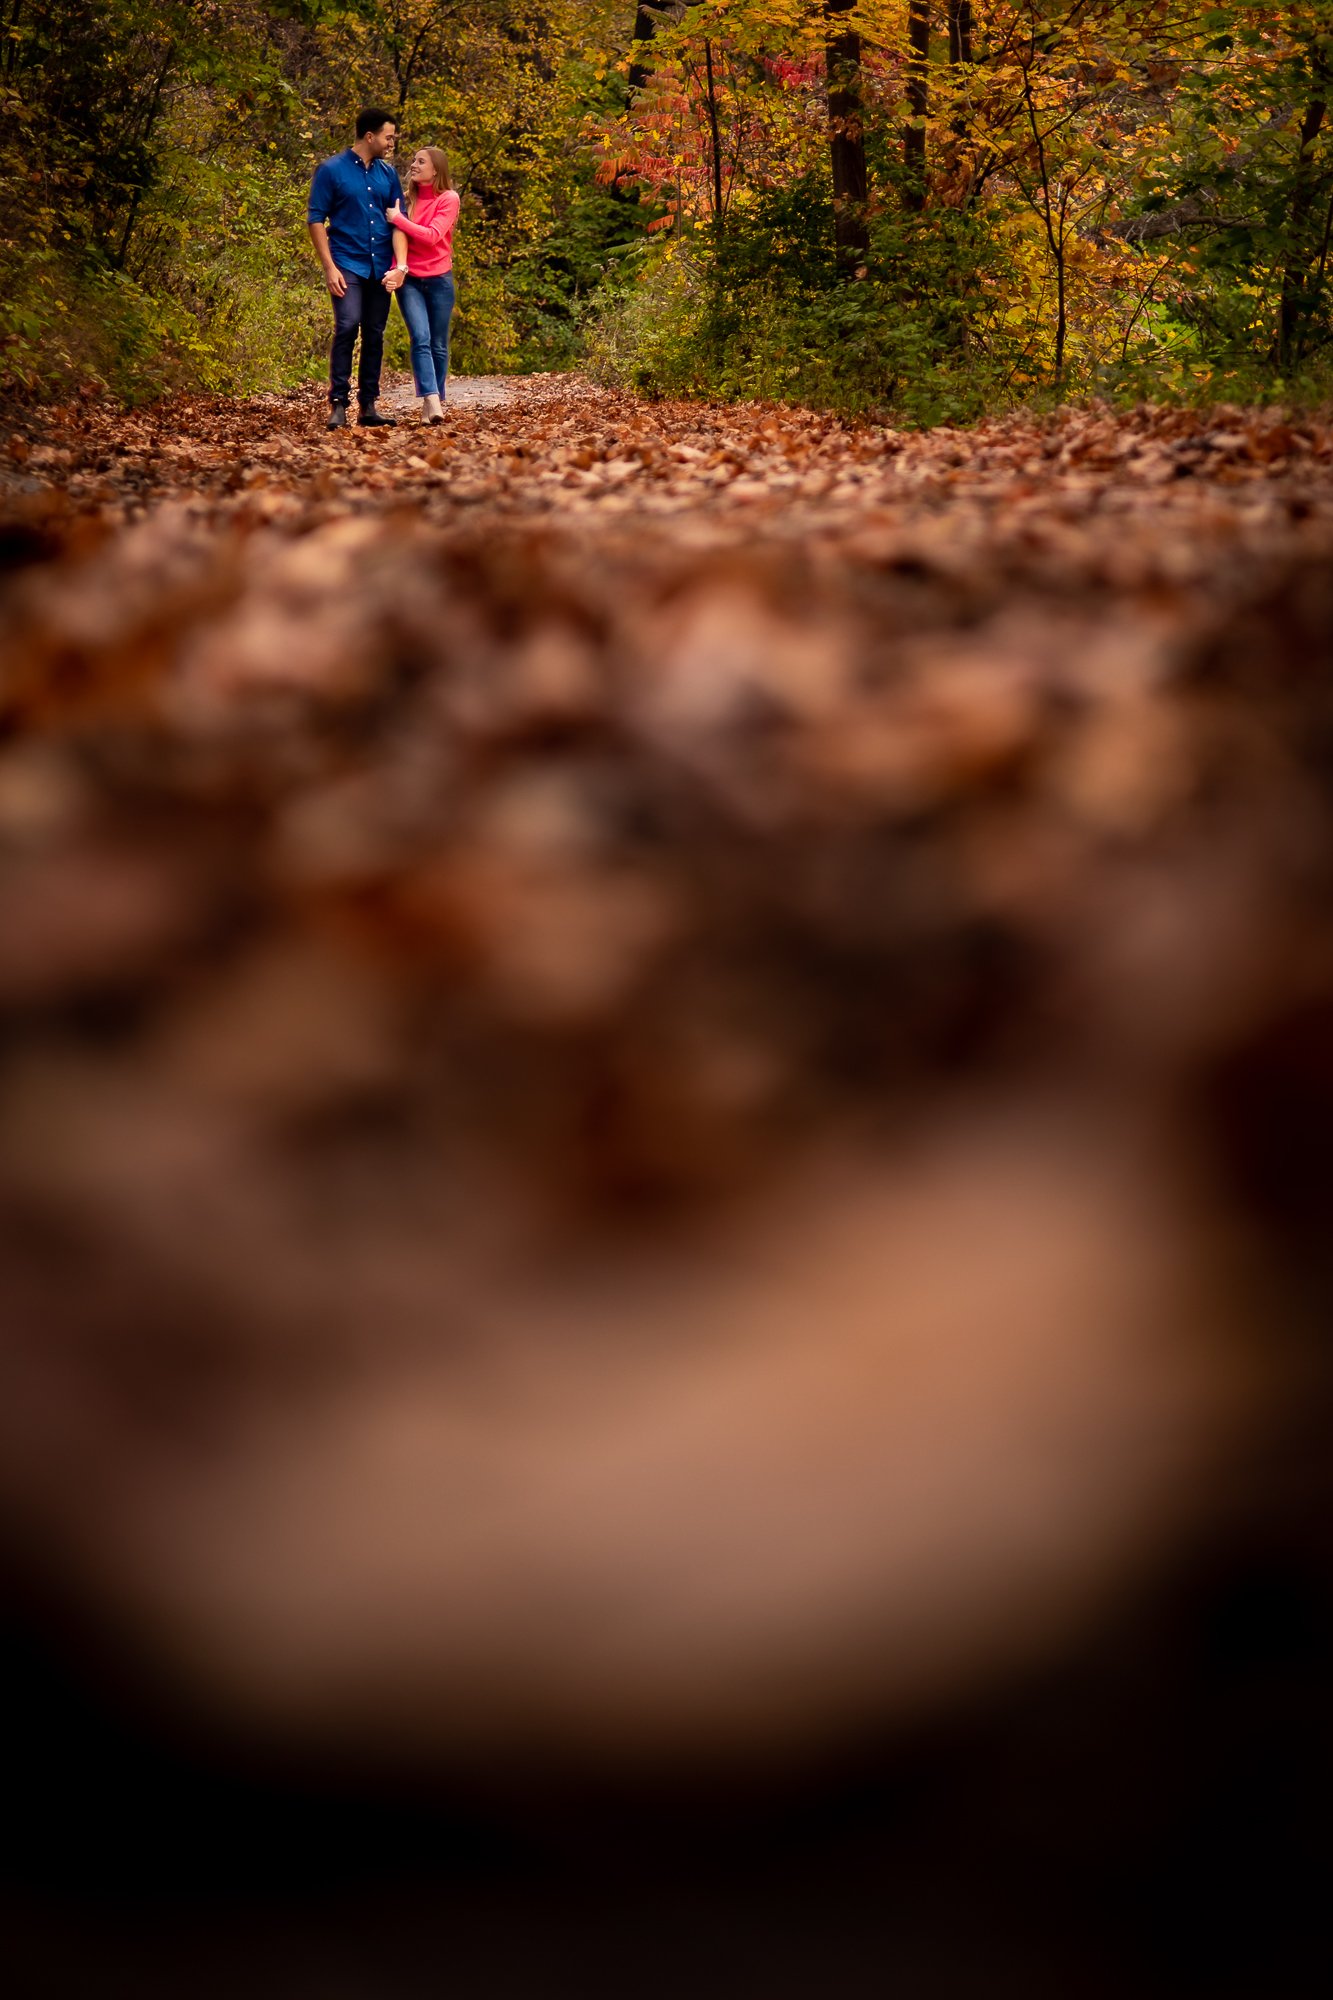 kelso-conservation-area-fall-shoot-9.jpg